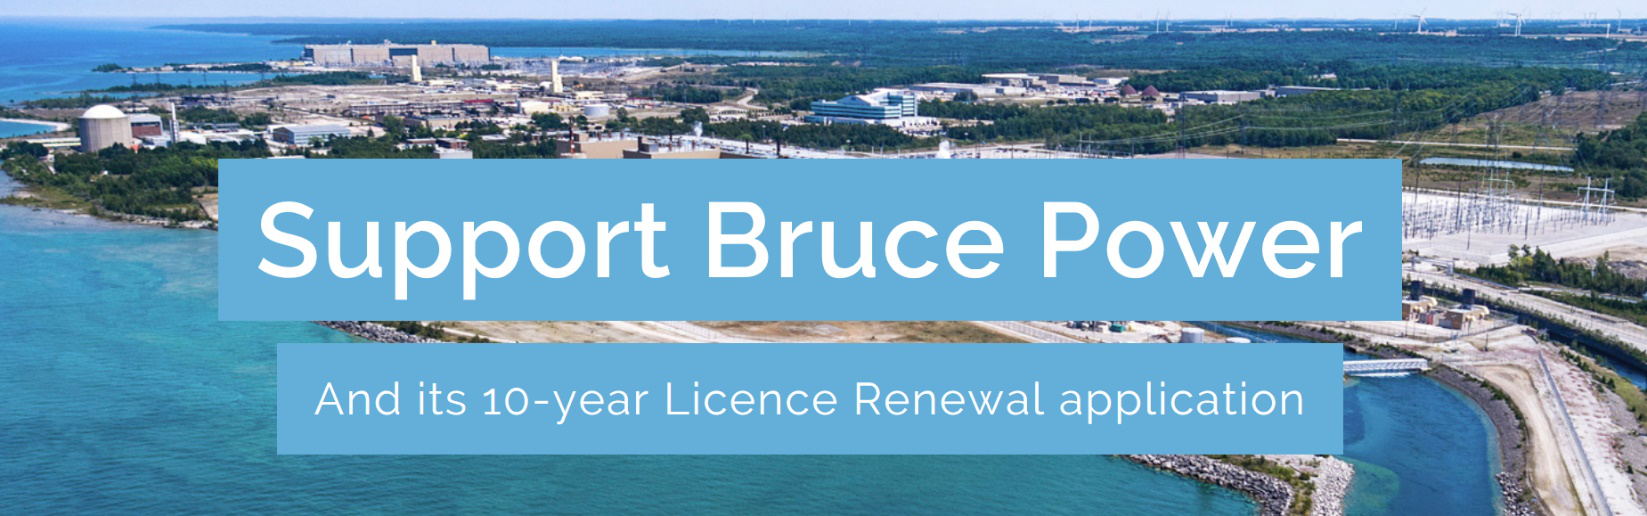 Support Bruce Power